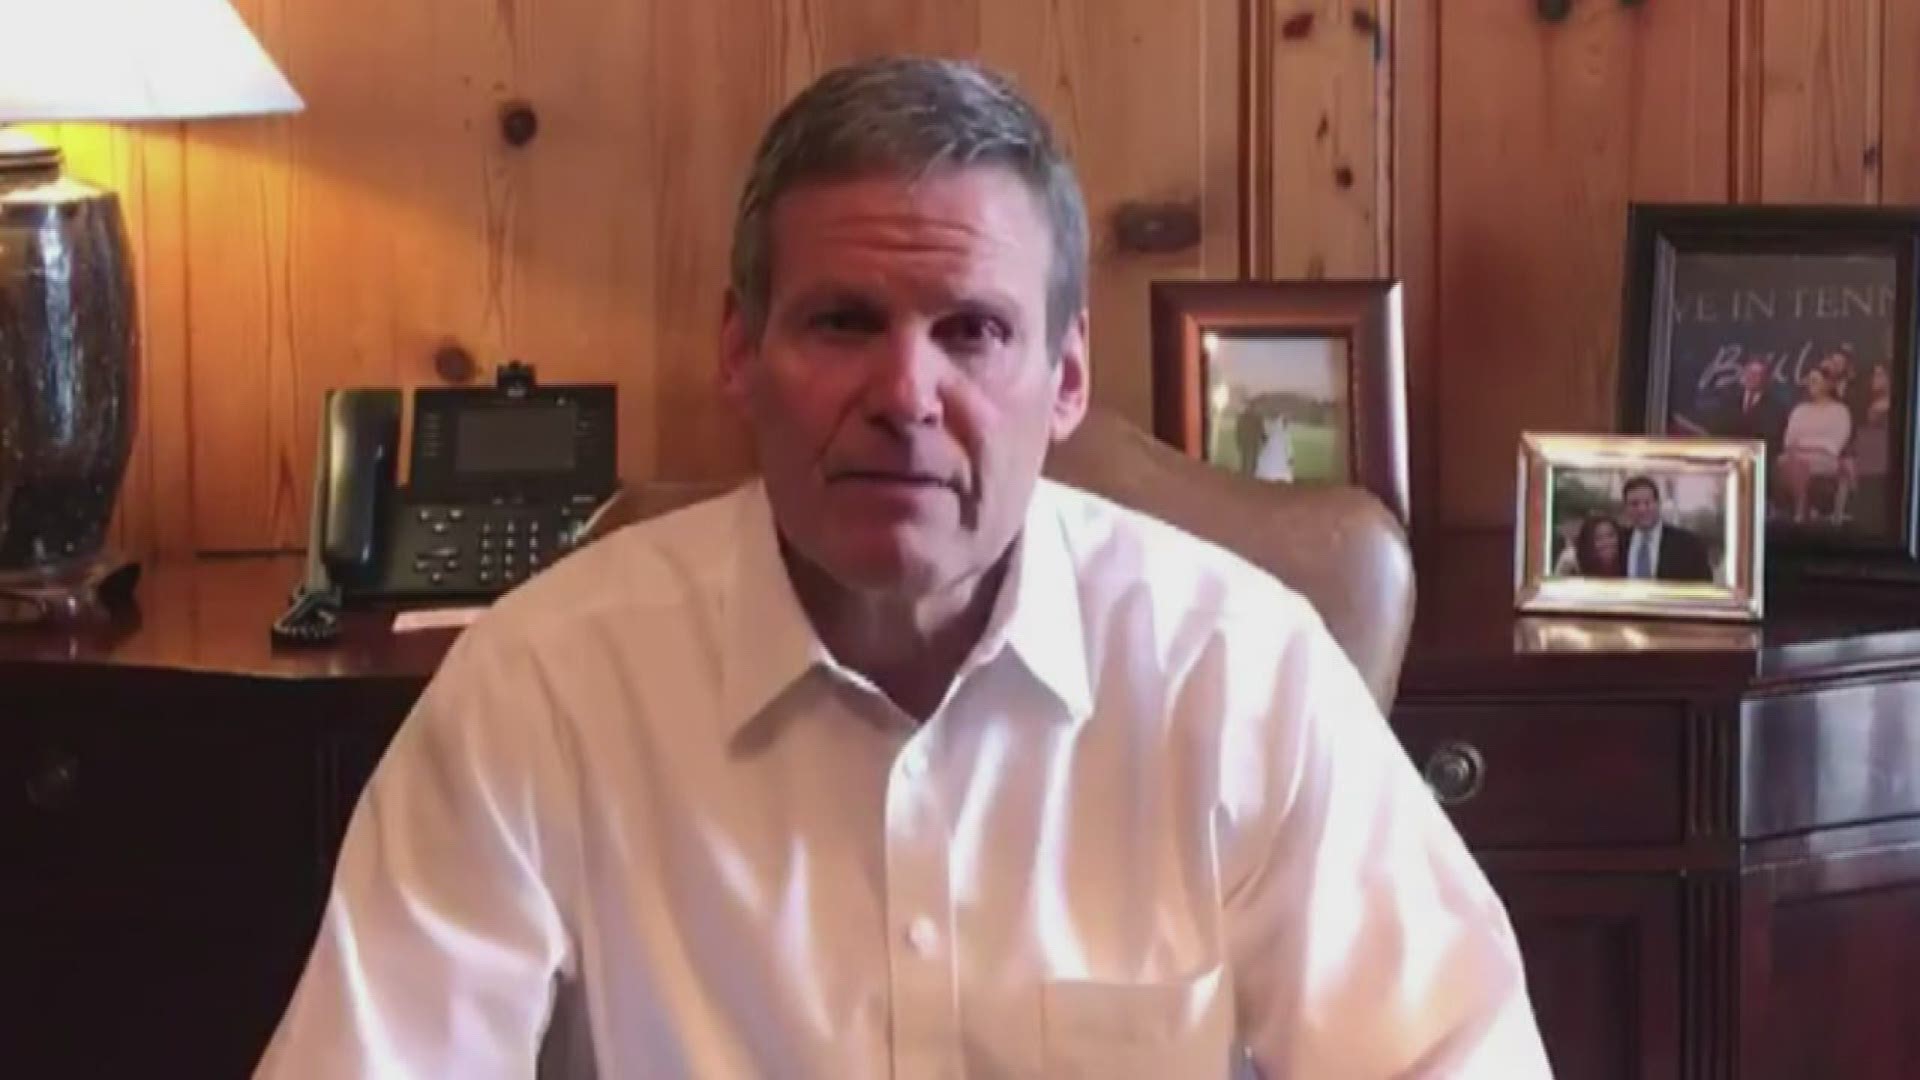 Tennessee Gov. Bill Lee signs Executive Order 17: suspends in-person dining, closes gyms, takes other measures to slow coronavirus spread